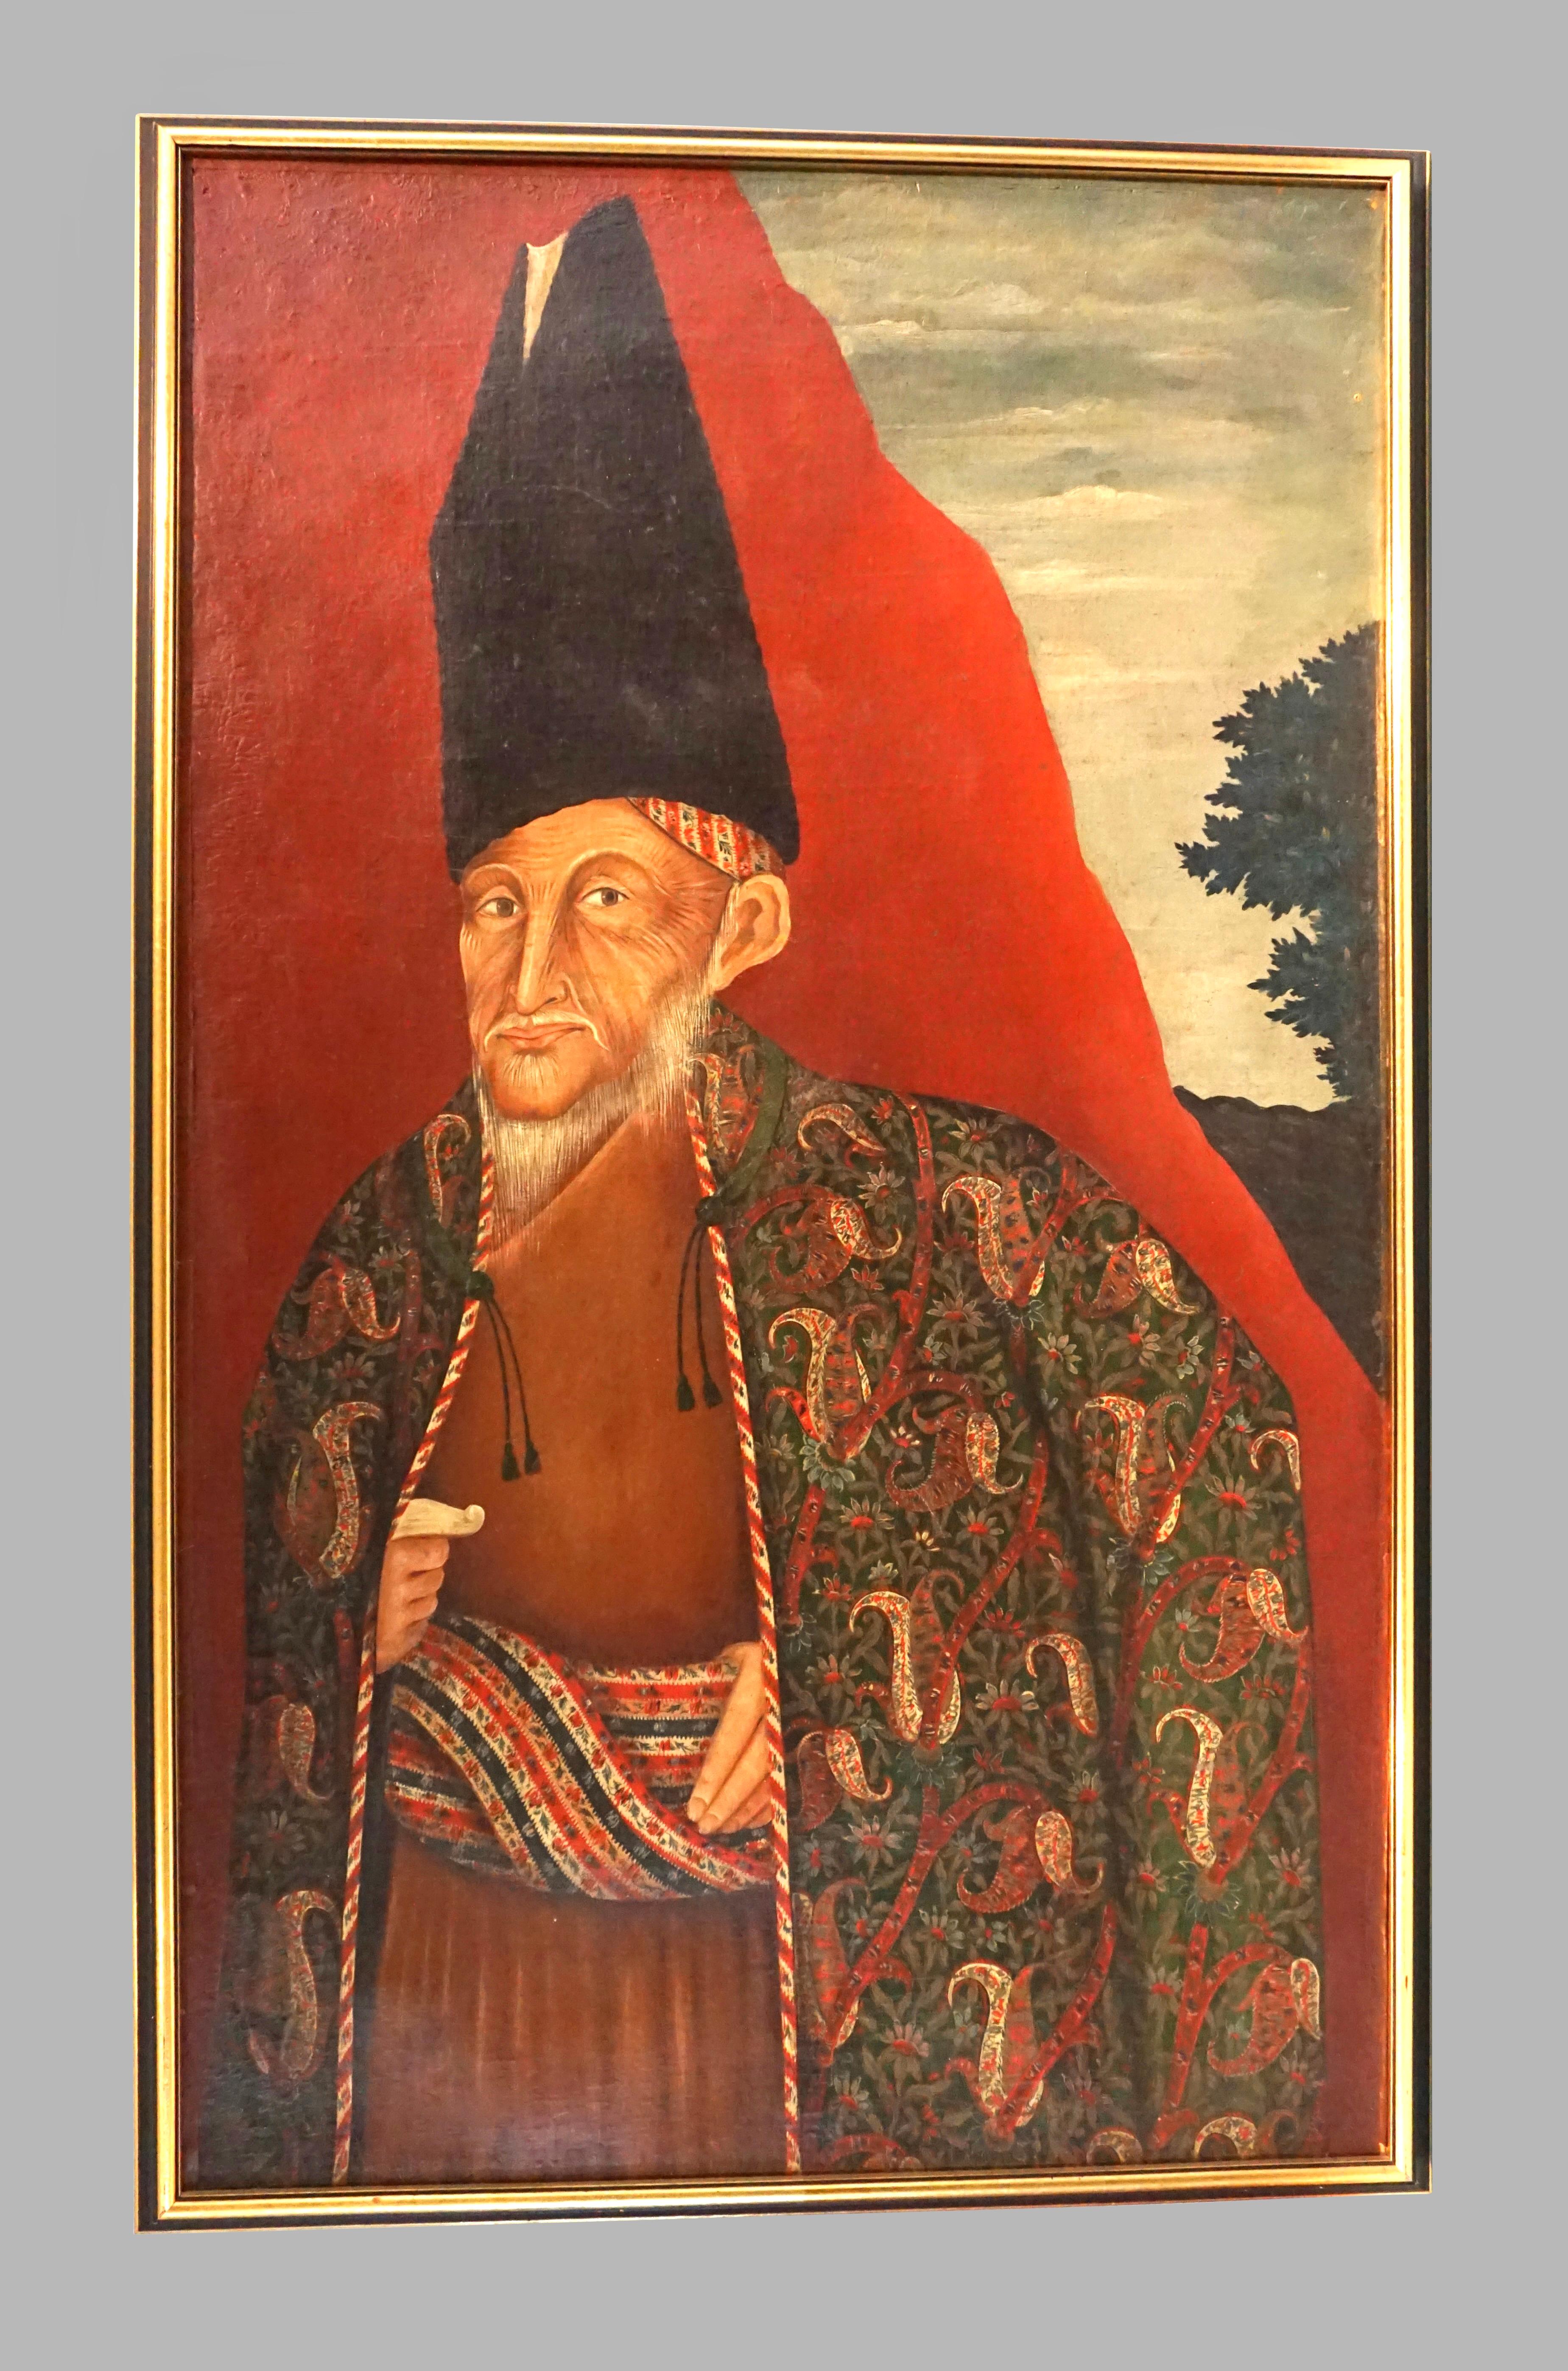 A large scale highly decorative and dramatic portrait depicting an historic Persian foreign and ultimately prime minister, Mirza Aghassi also known as Haji Mirza Abbas Iravani born in 1783. The sitter is dressed in a magnificent and colorful coat